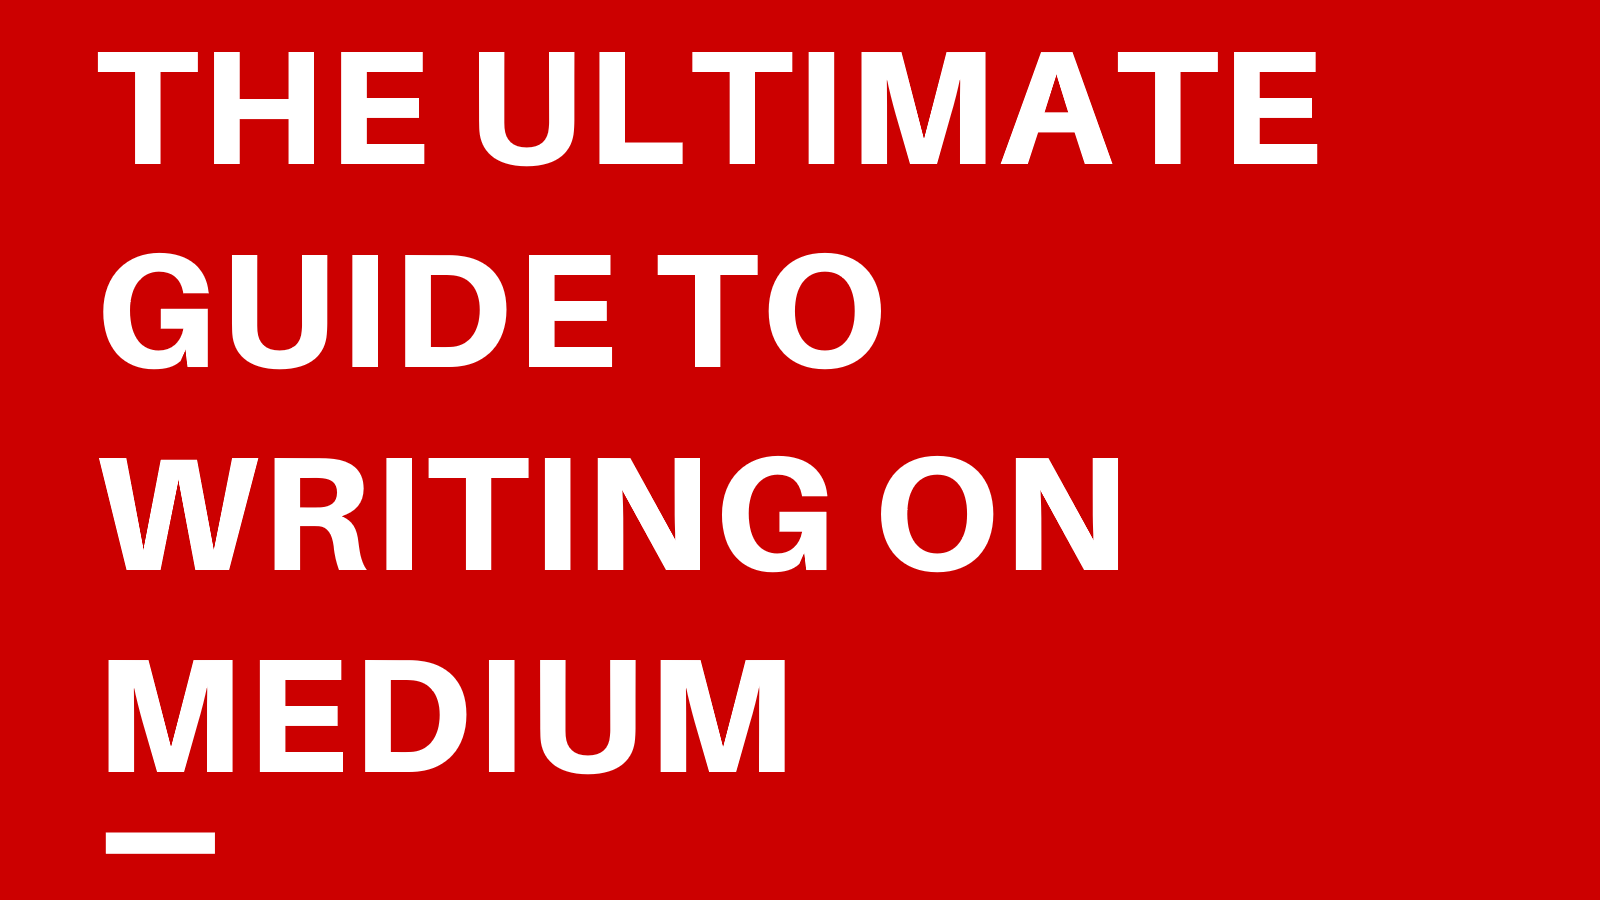 The Ultimate Guide to Writing on Medium  by Casey Botticello